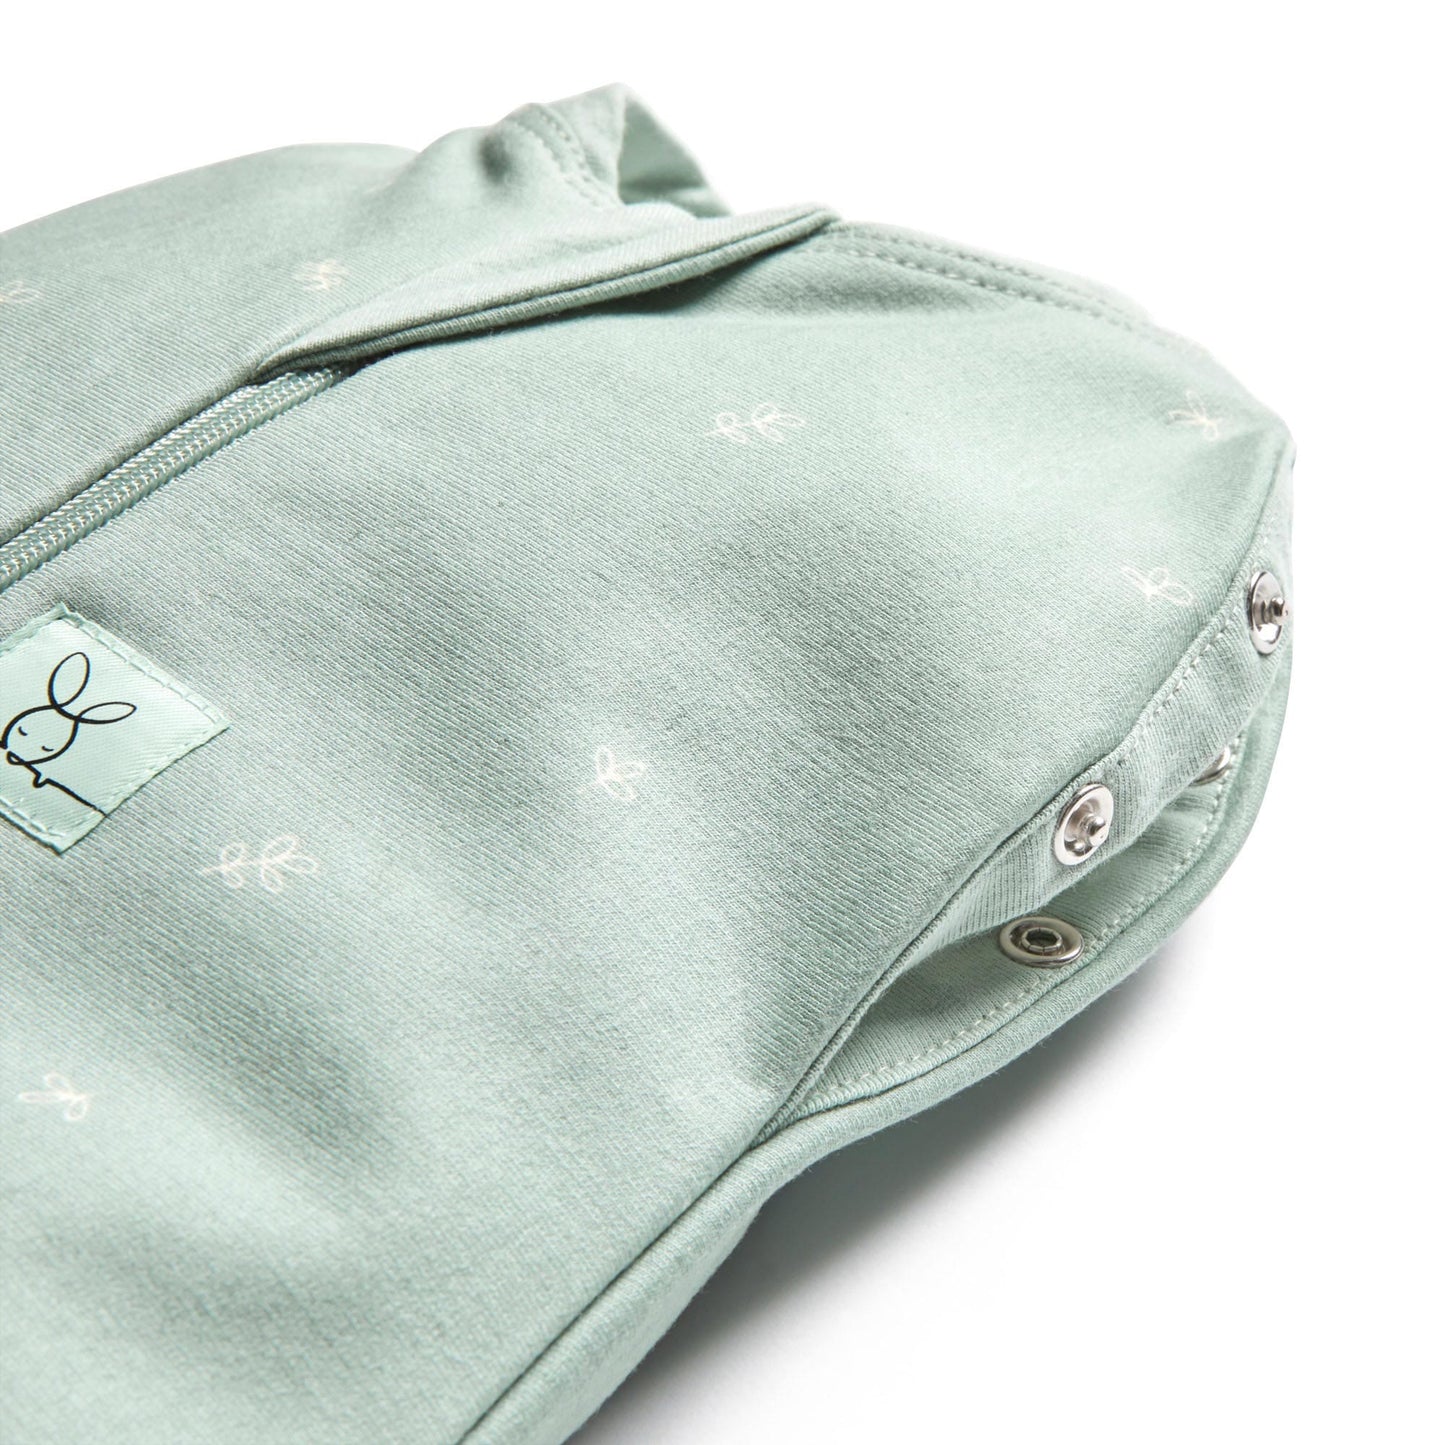 Ergopouch - Cocoon Swaddle Bag - Critters - 1 Tog - Stylemykid.com